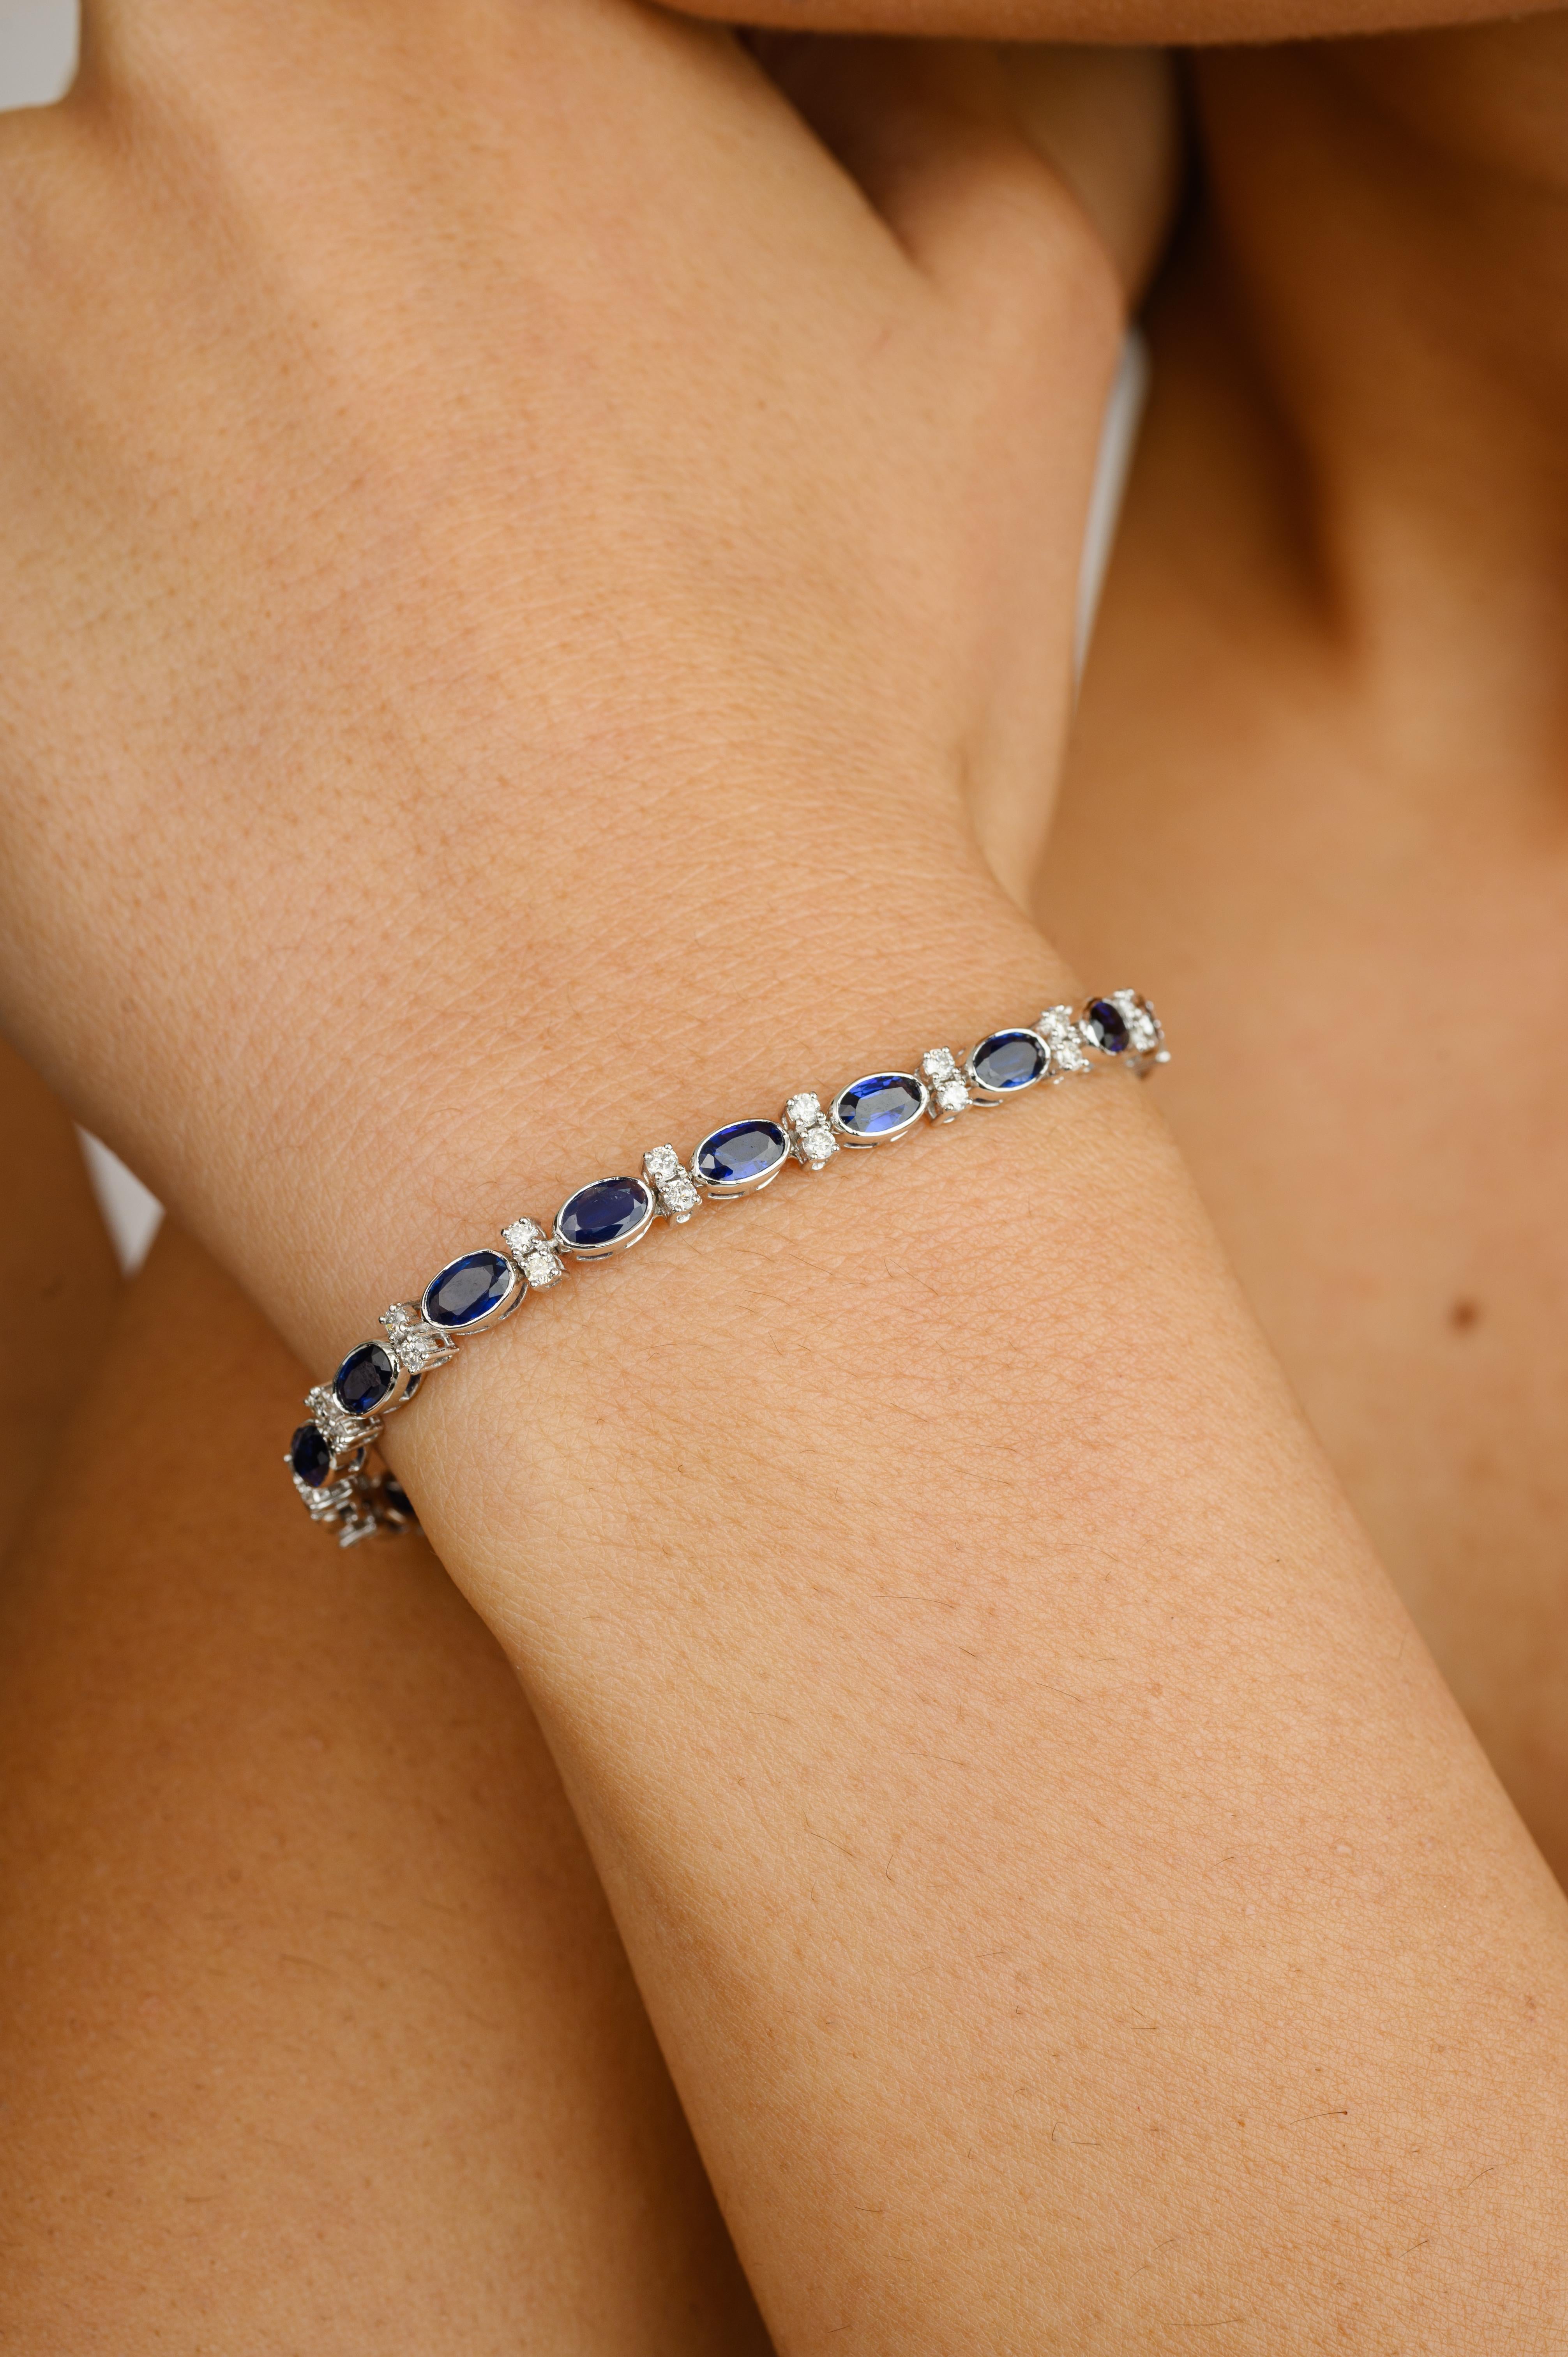 This 6.82 Carat Natural Blue Sapphire and Diamond Bracelet  in 18K gold showcases endlessly sparkling natural blue sapphire of 6.82 carats and 0.97 carats diamonds. It measures 7.25 inches long in length. 
Sapphire stimulates concentration and